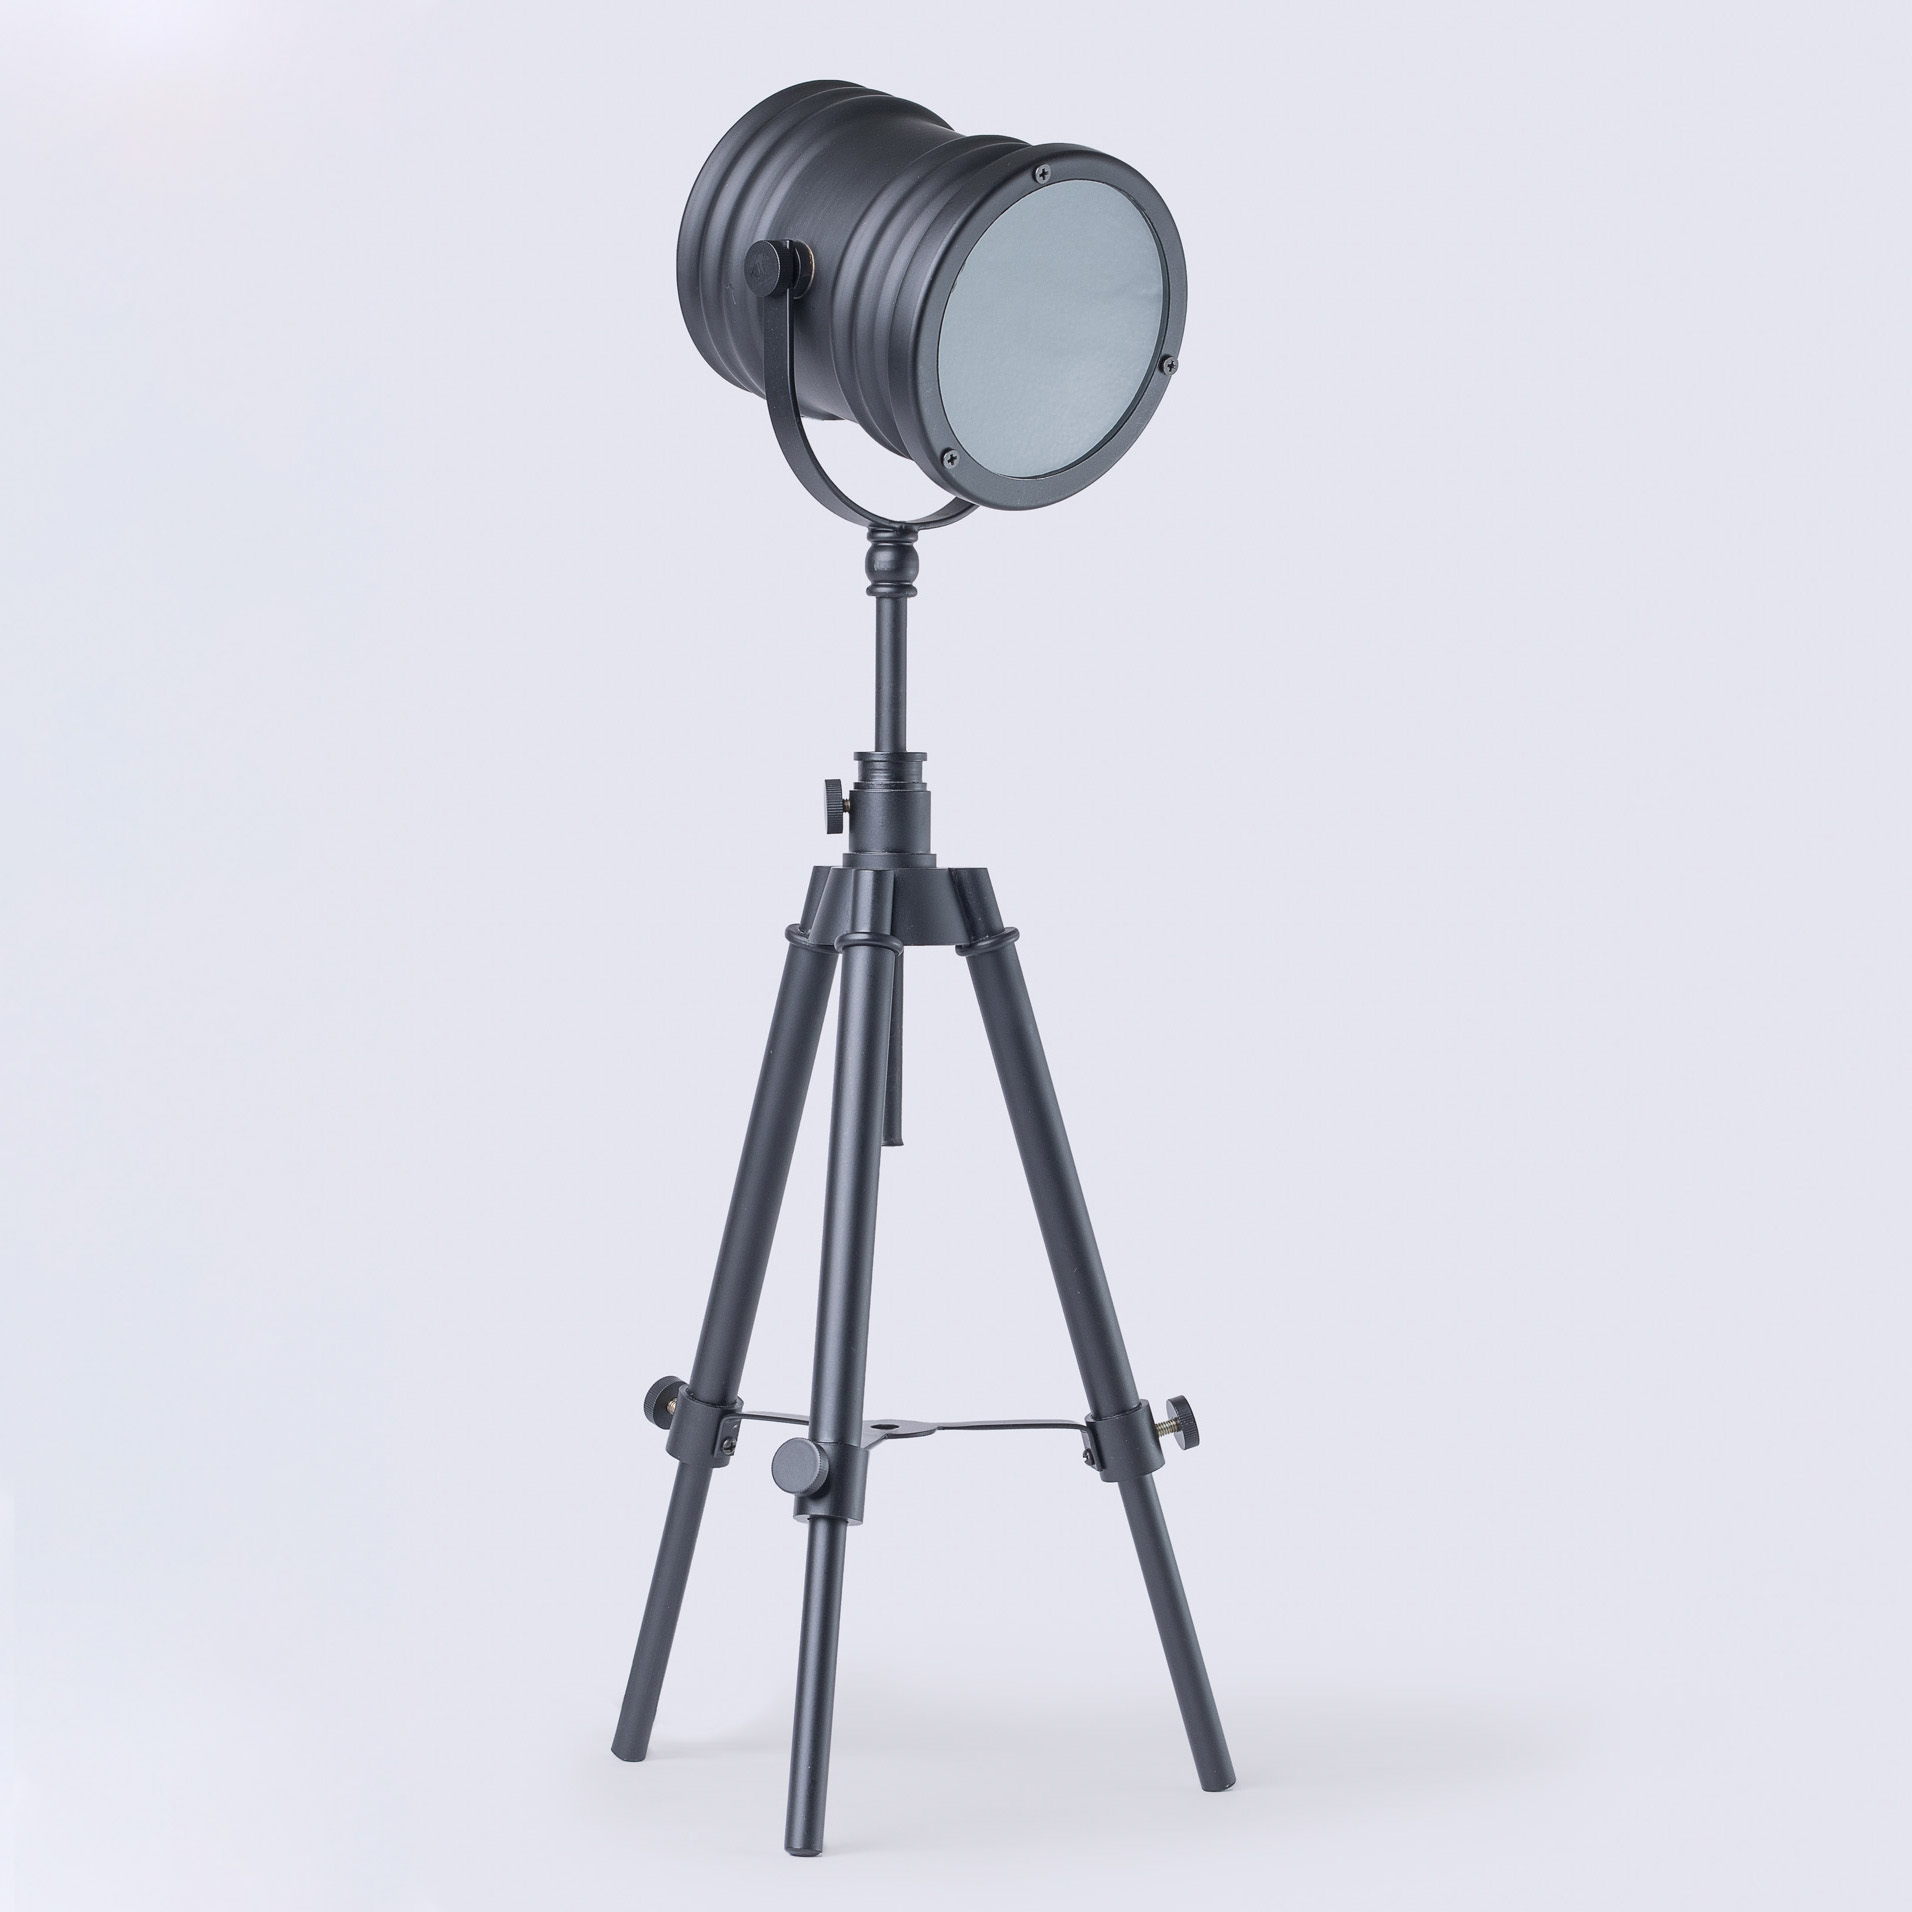 Product Photography of a black desk lamp. It has a gray background.